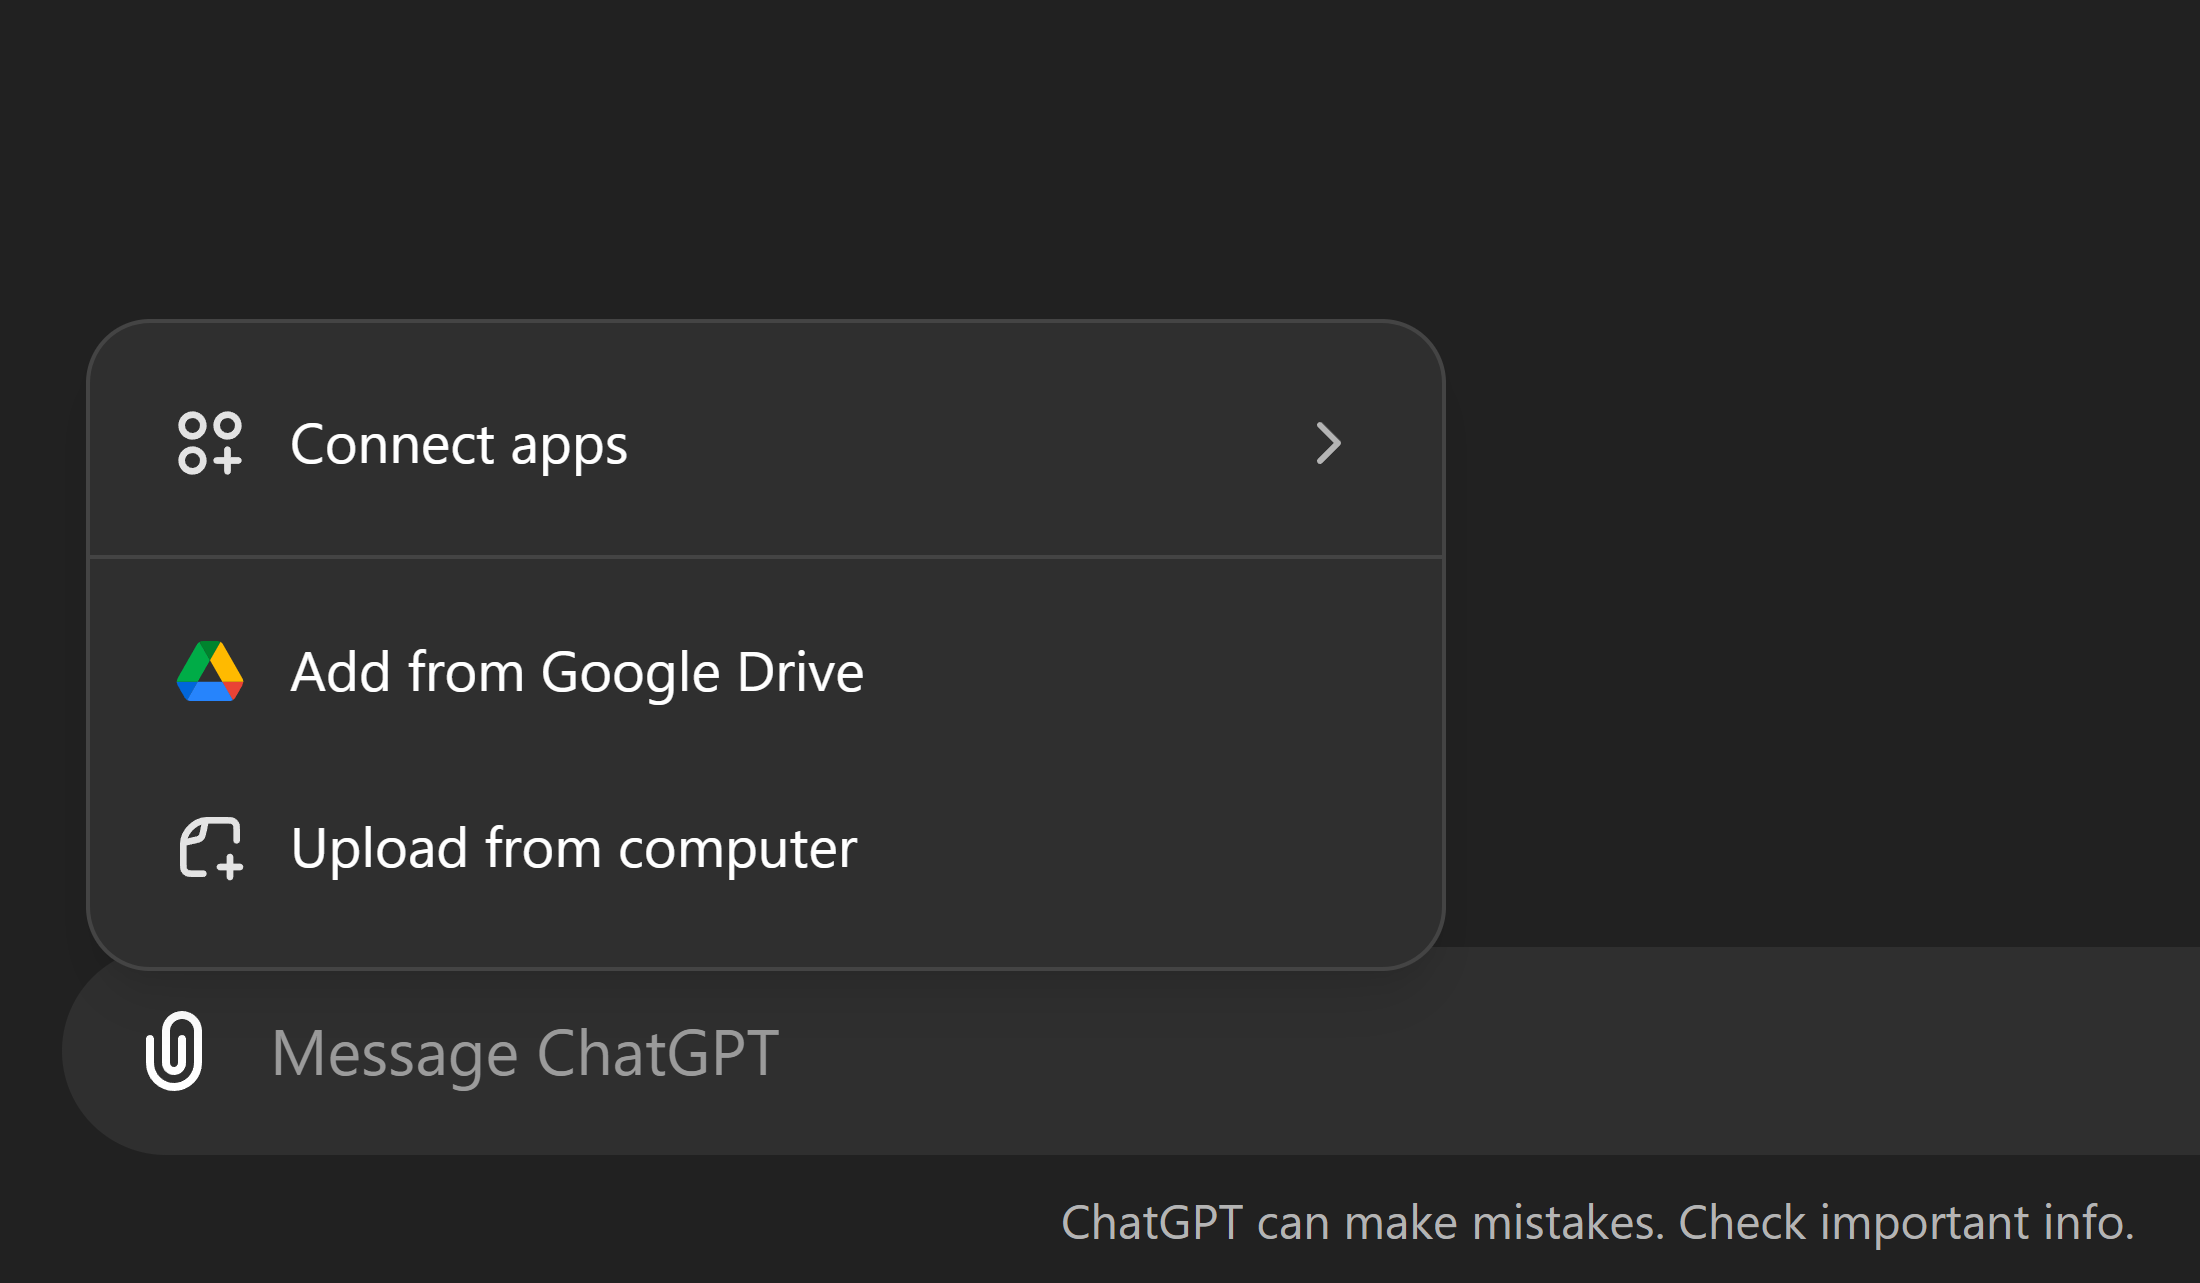 Uploading a File to ChatGPT